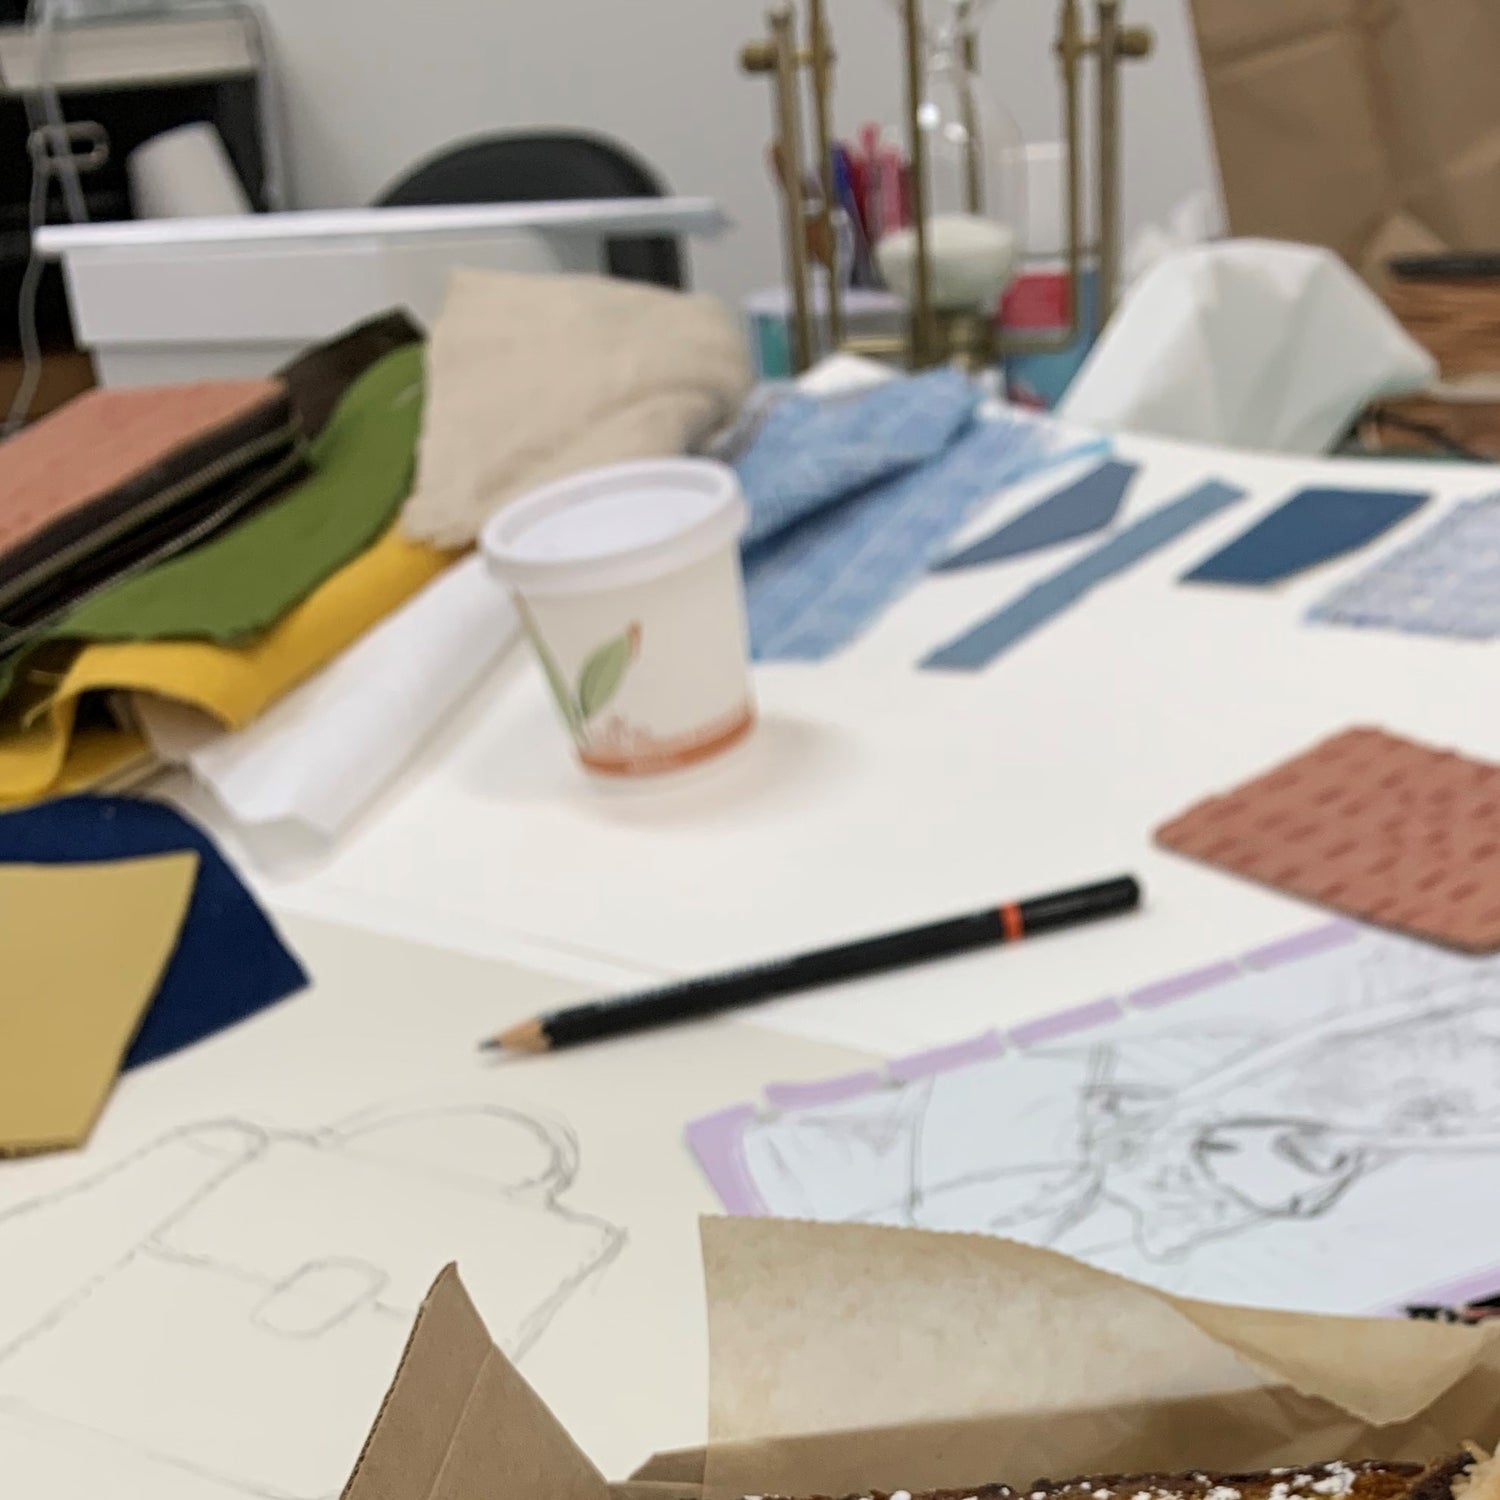 view of fabric and leather swatches with pencil sketches of bag design